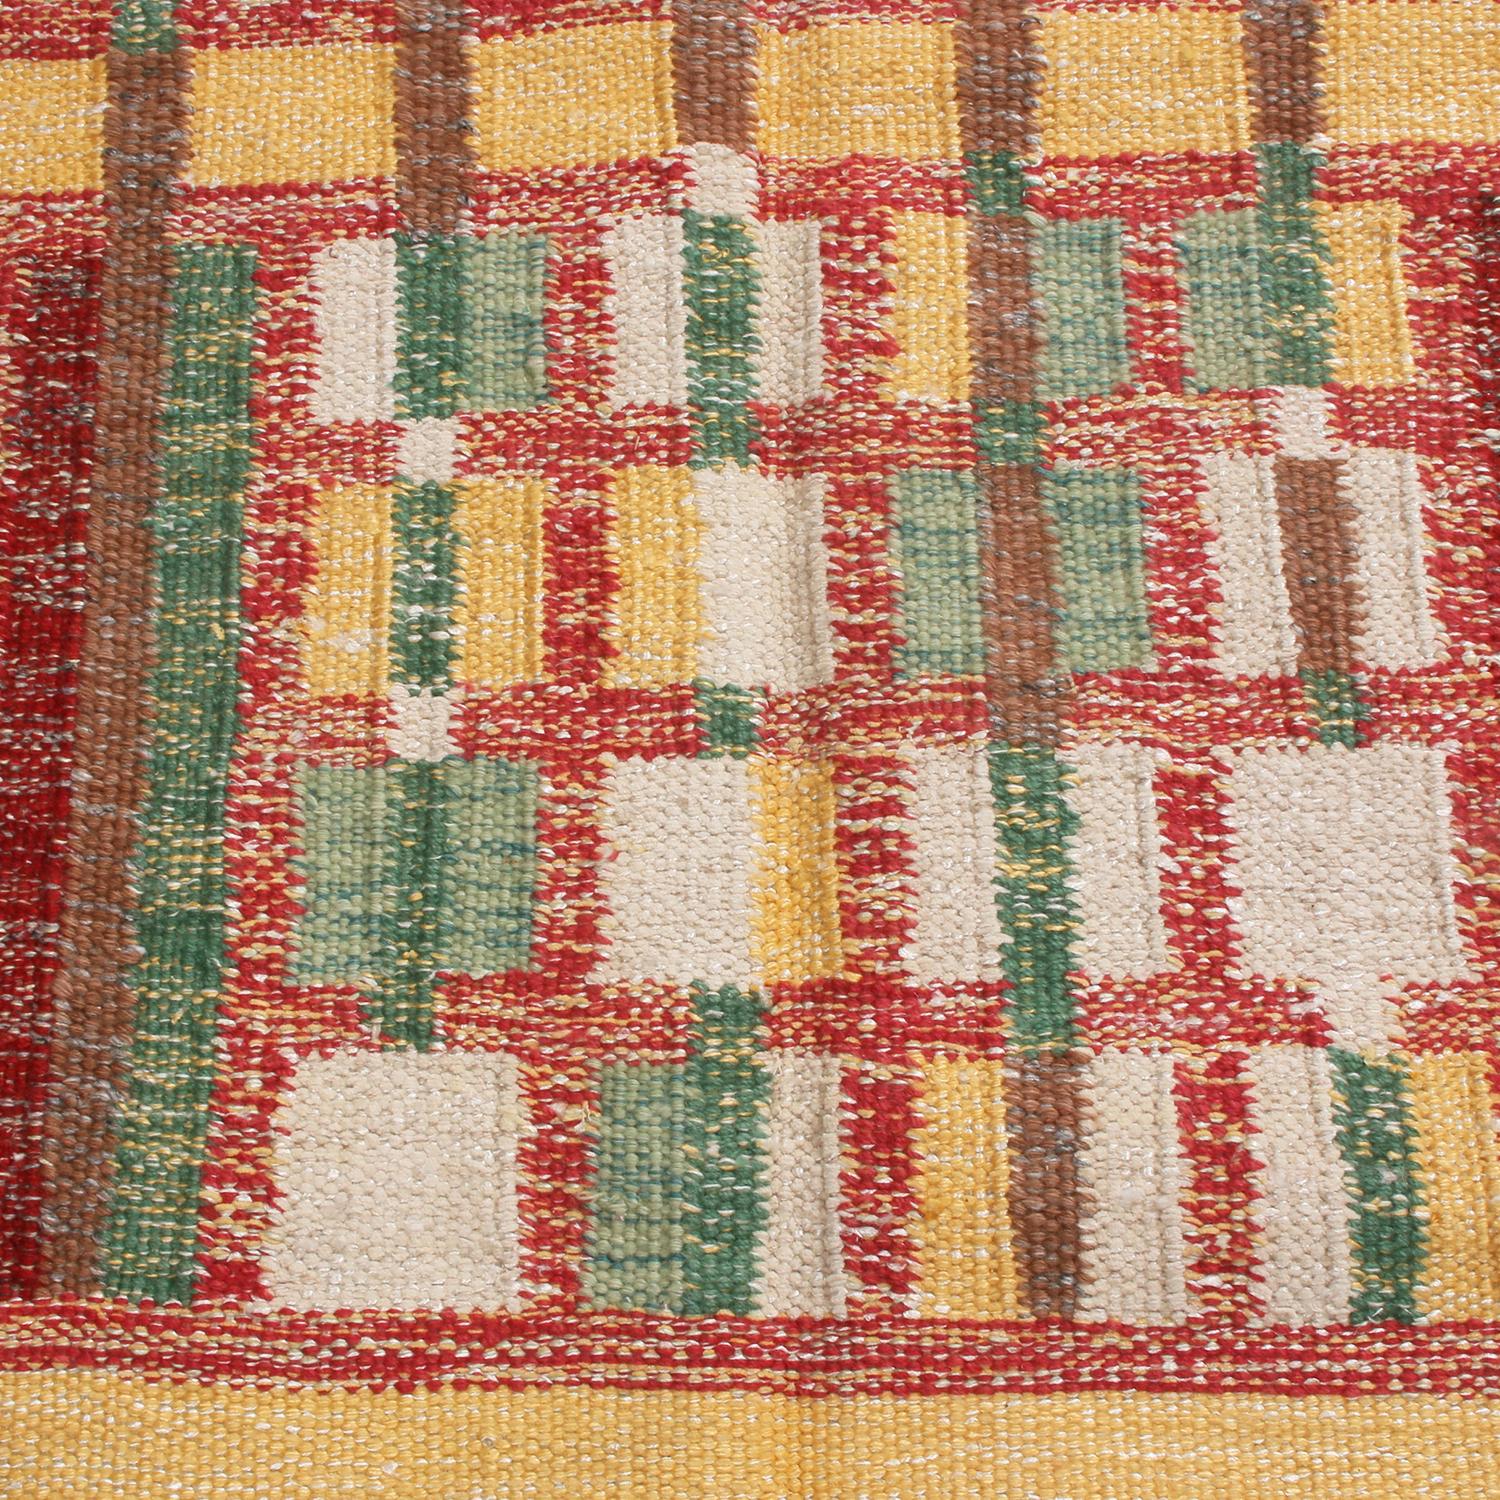 Scandinavian Modern Rug & Kilim's Scandinavian Inspired Red and Green Wool Rug with Natural Yarn For Sale